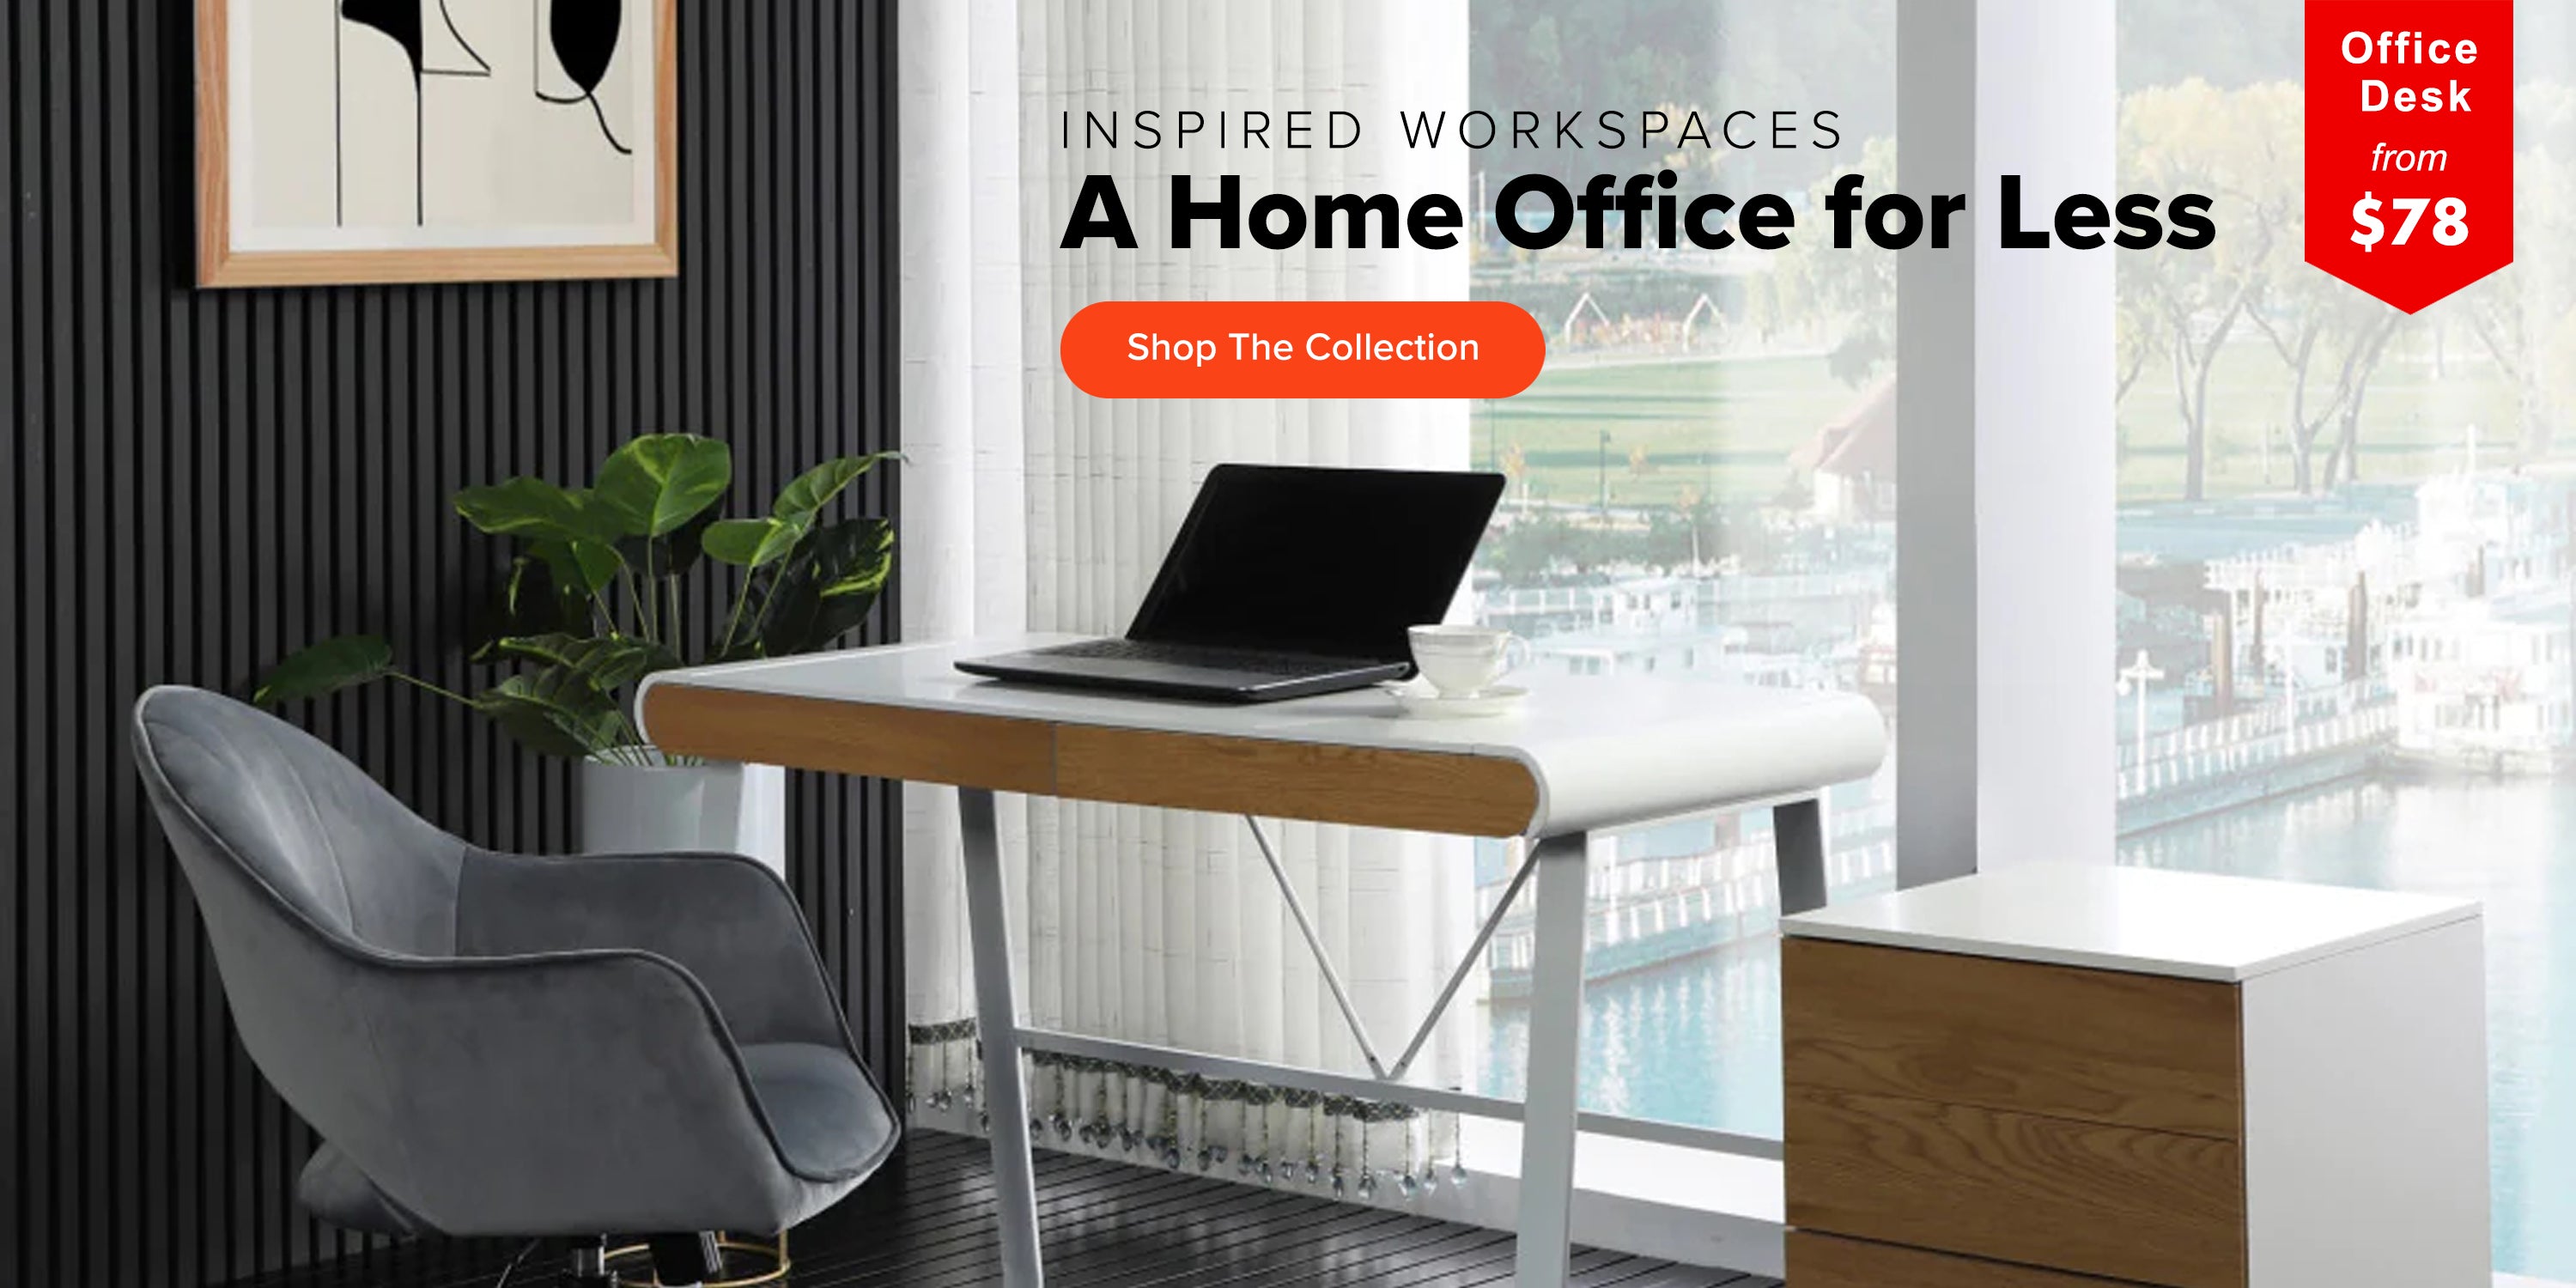 Inspired Workspaces - A Home Office for Less